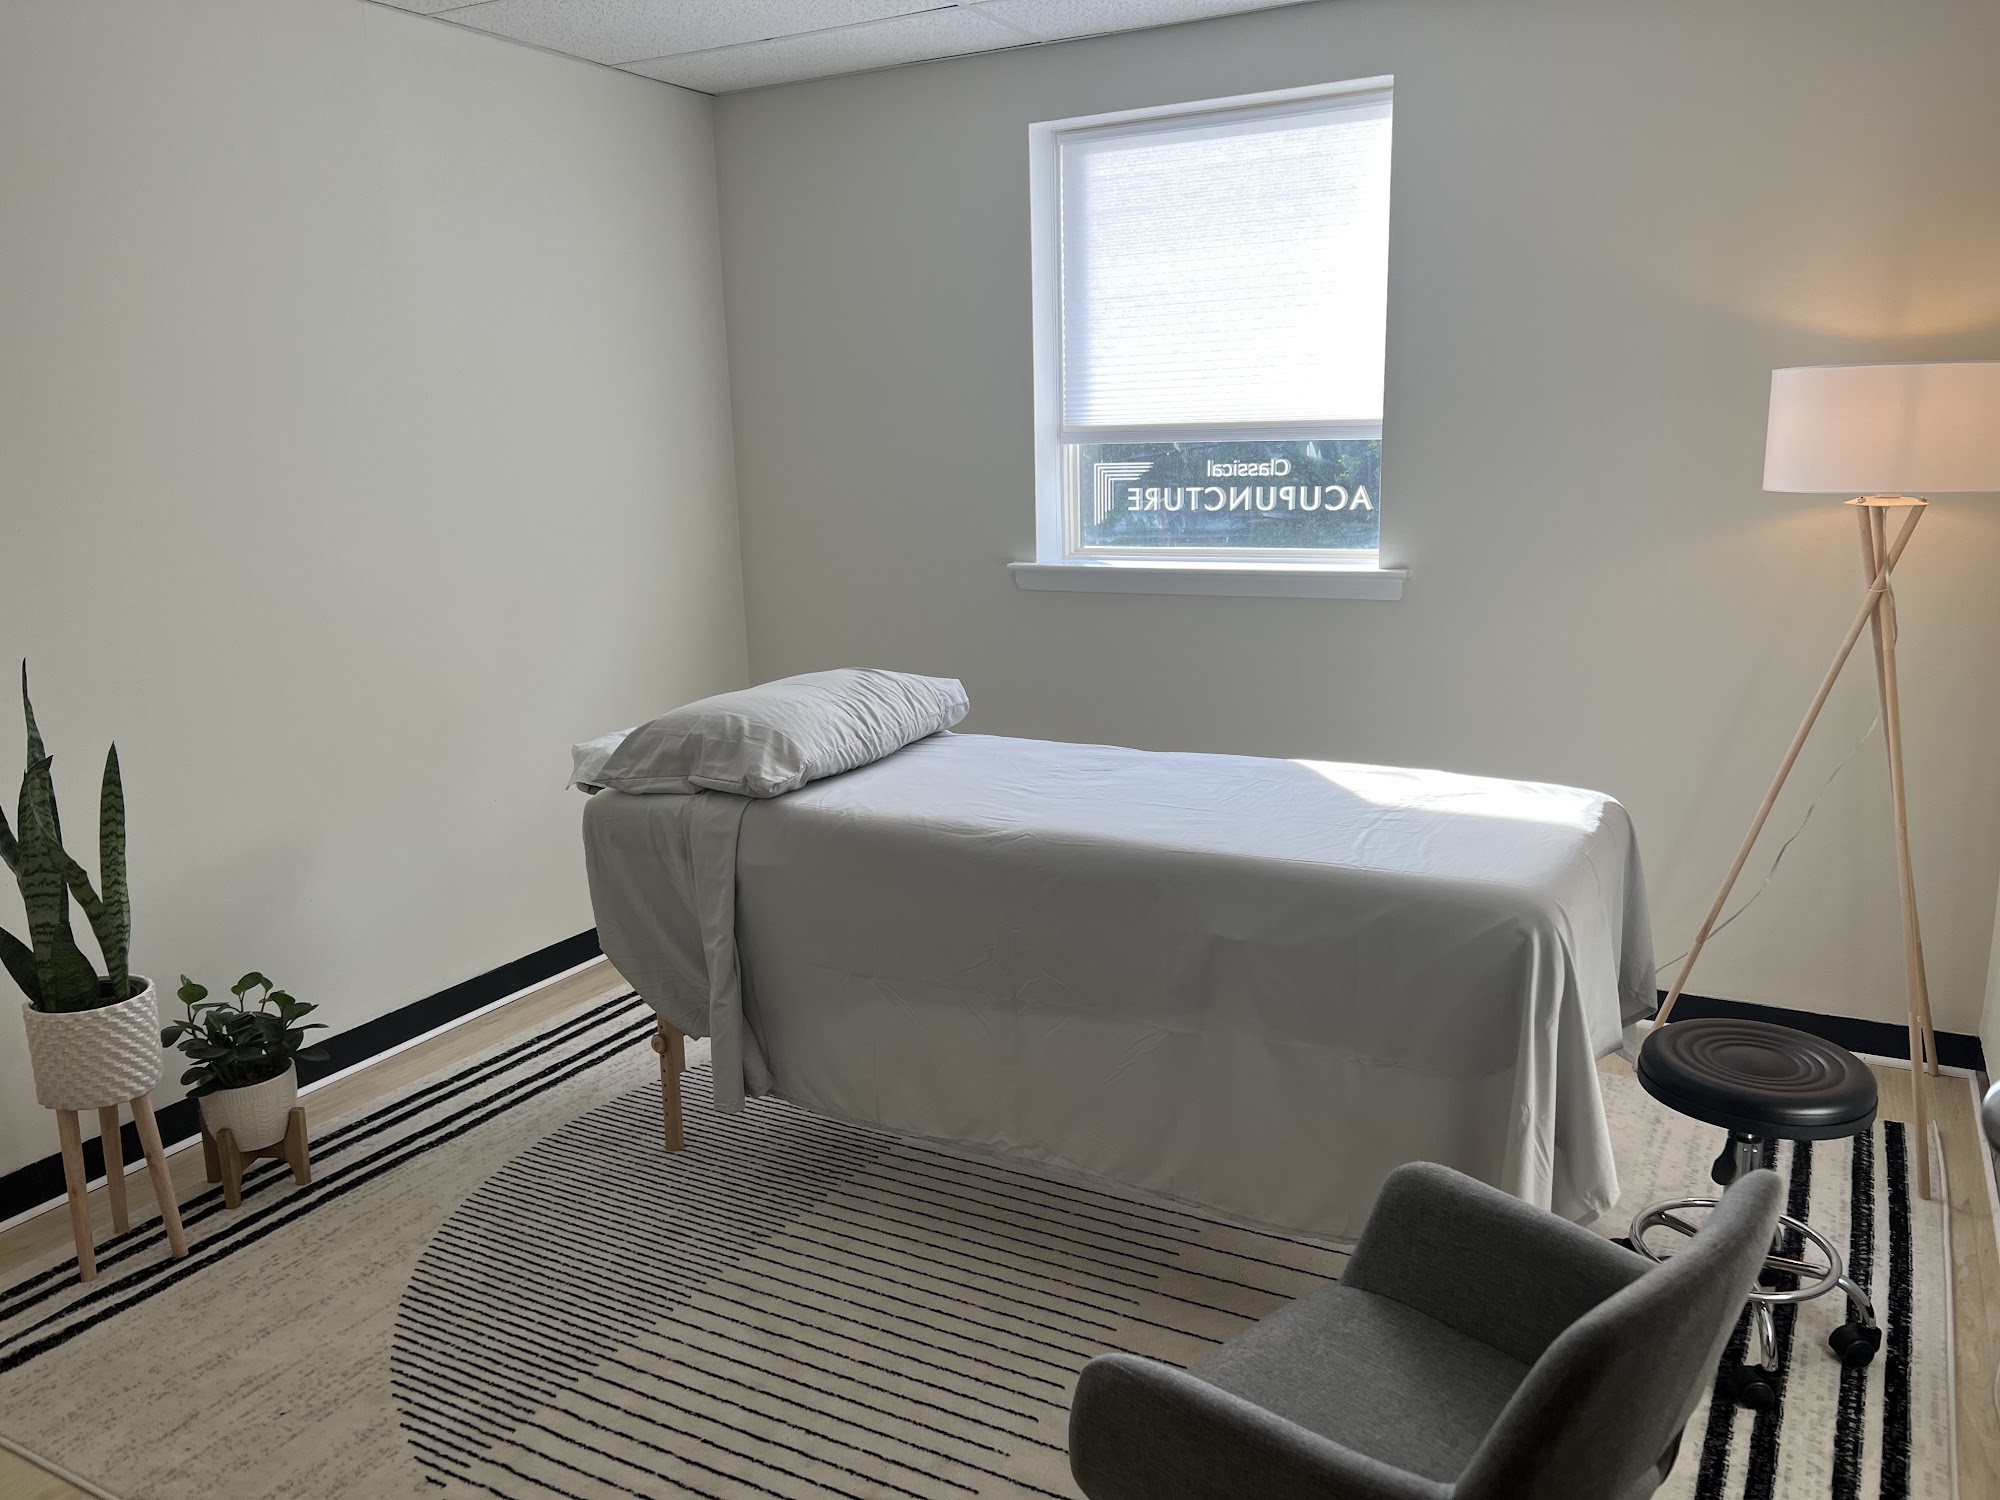 Classical Acupuncture Helena Husfelt 1290 Baltimore Pike Suite 210, Chadds Ford Pennsylvania 19317